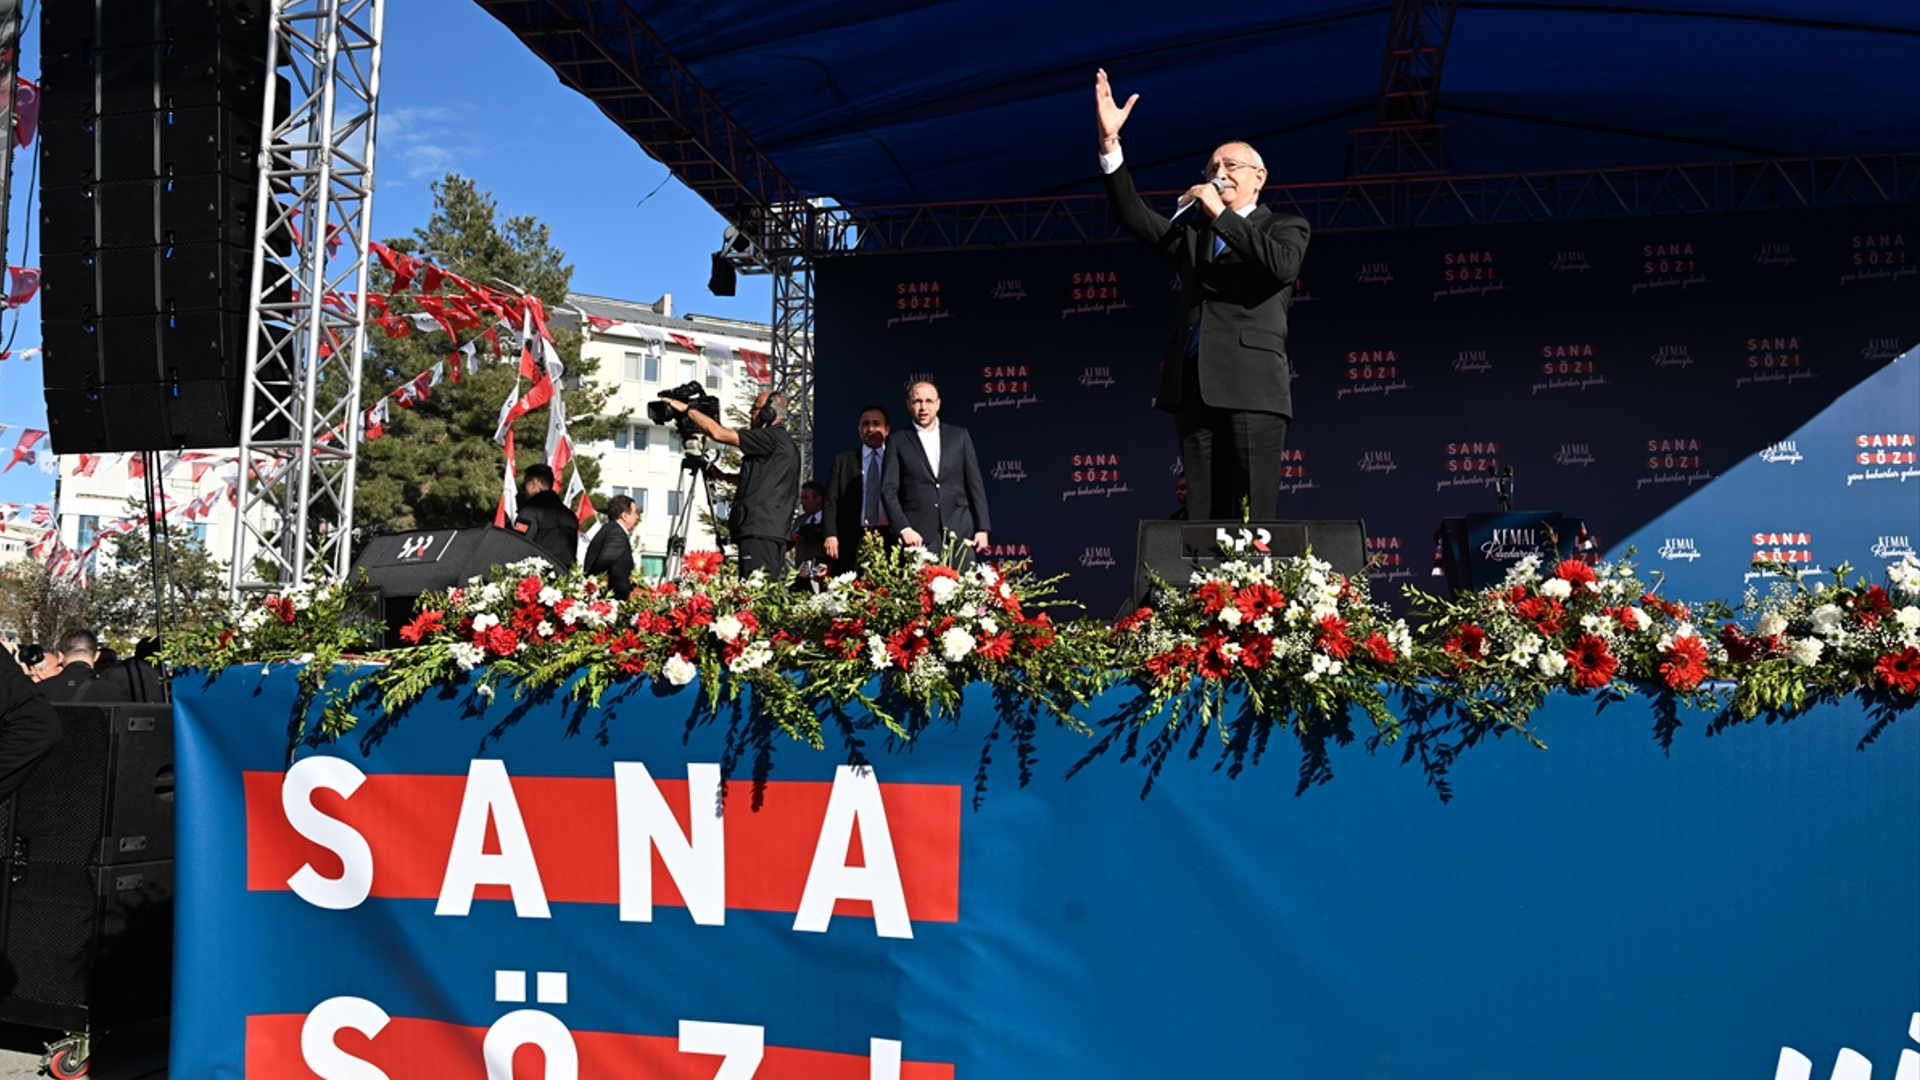 Leader of the Republican People's Party (CHP) Kemal Kilicdaroglu speaking at an election rally in the Turkish city of Van on 2 May 2023 (Anadolu Agency)